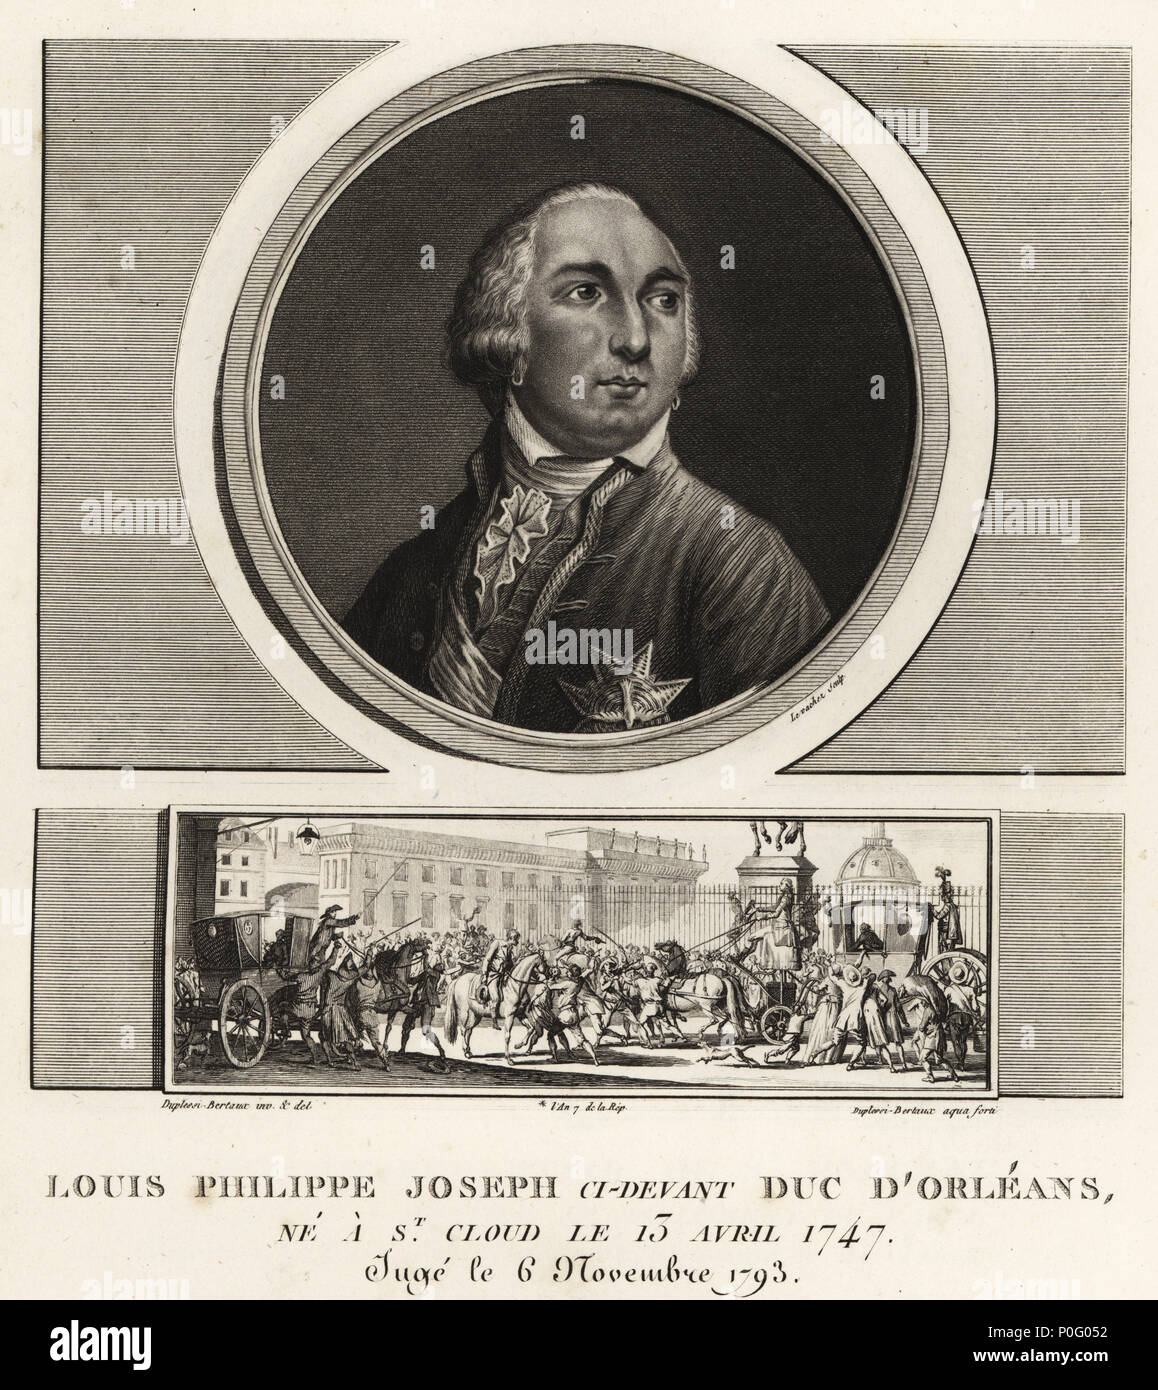 Louis Philippe II, Duke of Orleans (1747-1789), French duke guillotined during the Reign of Terror. Vignette shows the mob forcing him to descend from his coach to salute the statue of Henry IV. Mezzotint drawn and engraved by Jean Duplessis-Bertaux from his Collection Complete de 60 Portraits des Personnages qui ont le plus Figure dans la Revolution Francaise, Auber, Pairs, 1800. Portrait engraved by Charles Francois Gabriel Levachez. Stock Photo